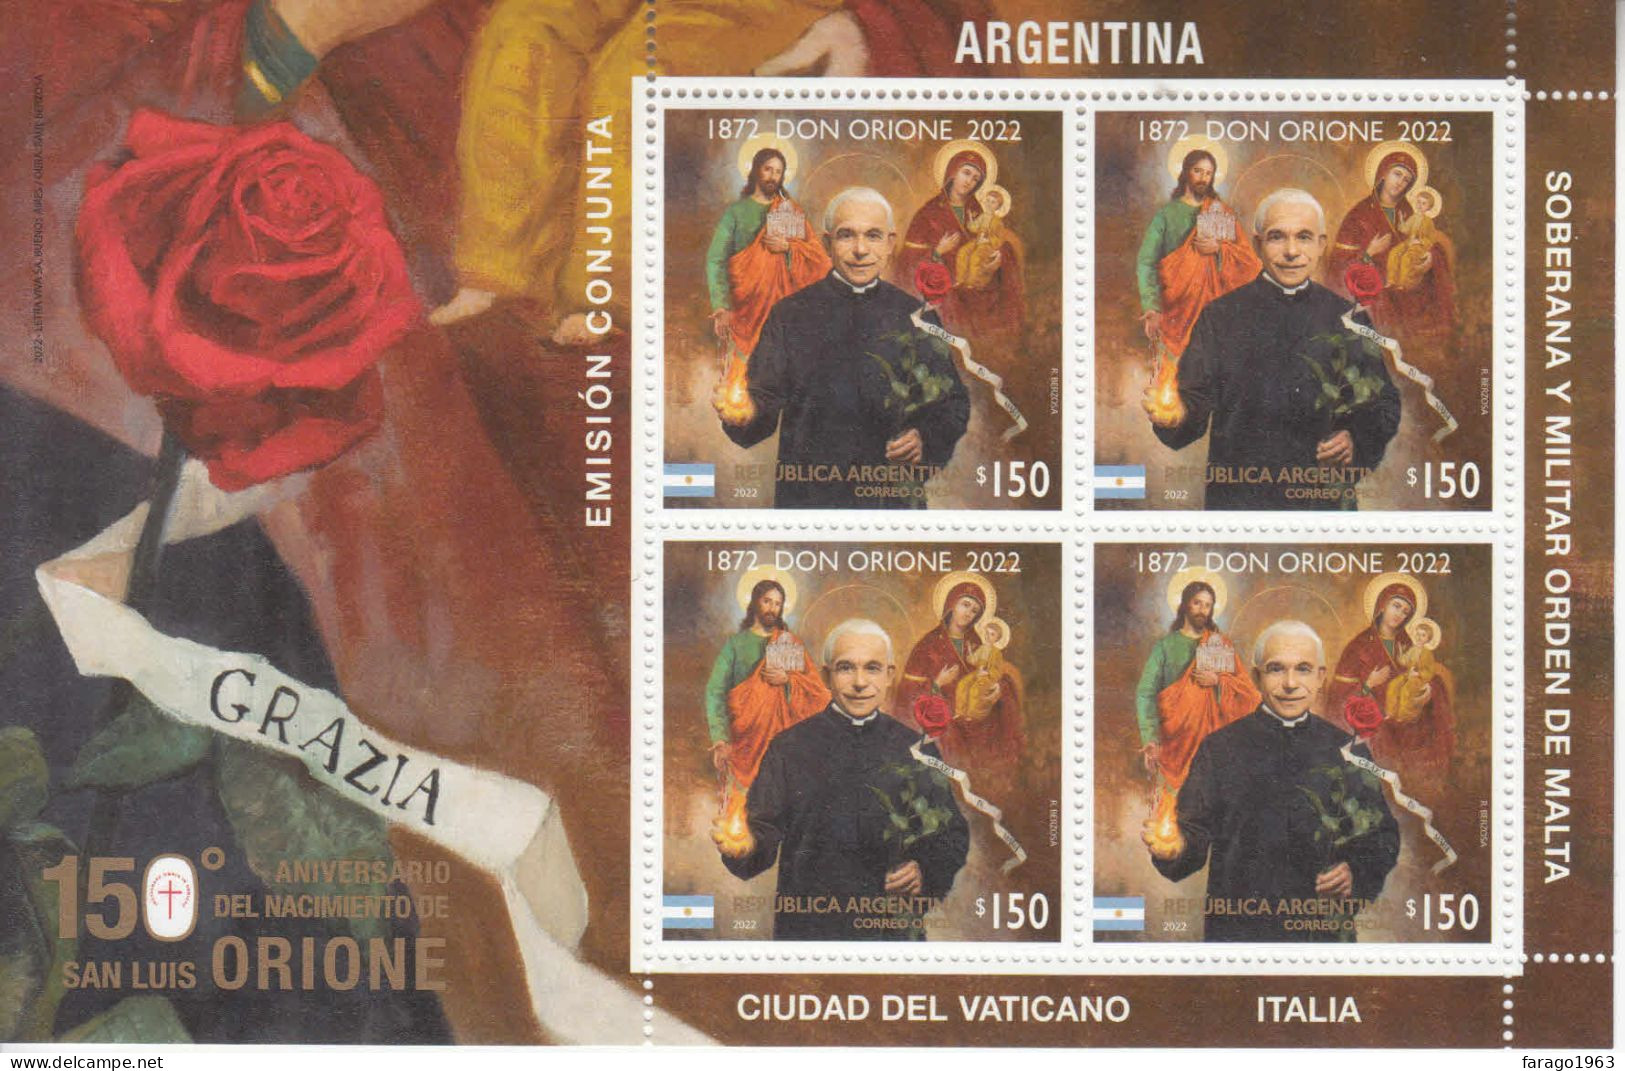 2022 Argentina Don Orione JOINT ISSUE Vatican Souvenir Sheet MNH - Nuevos